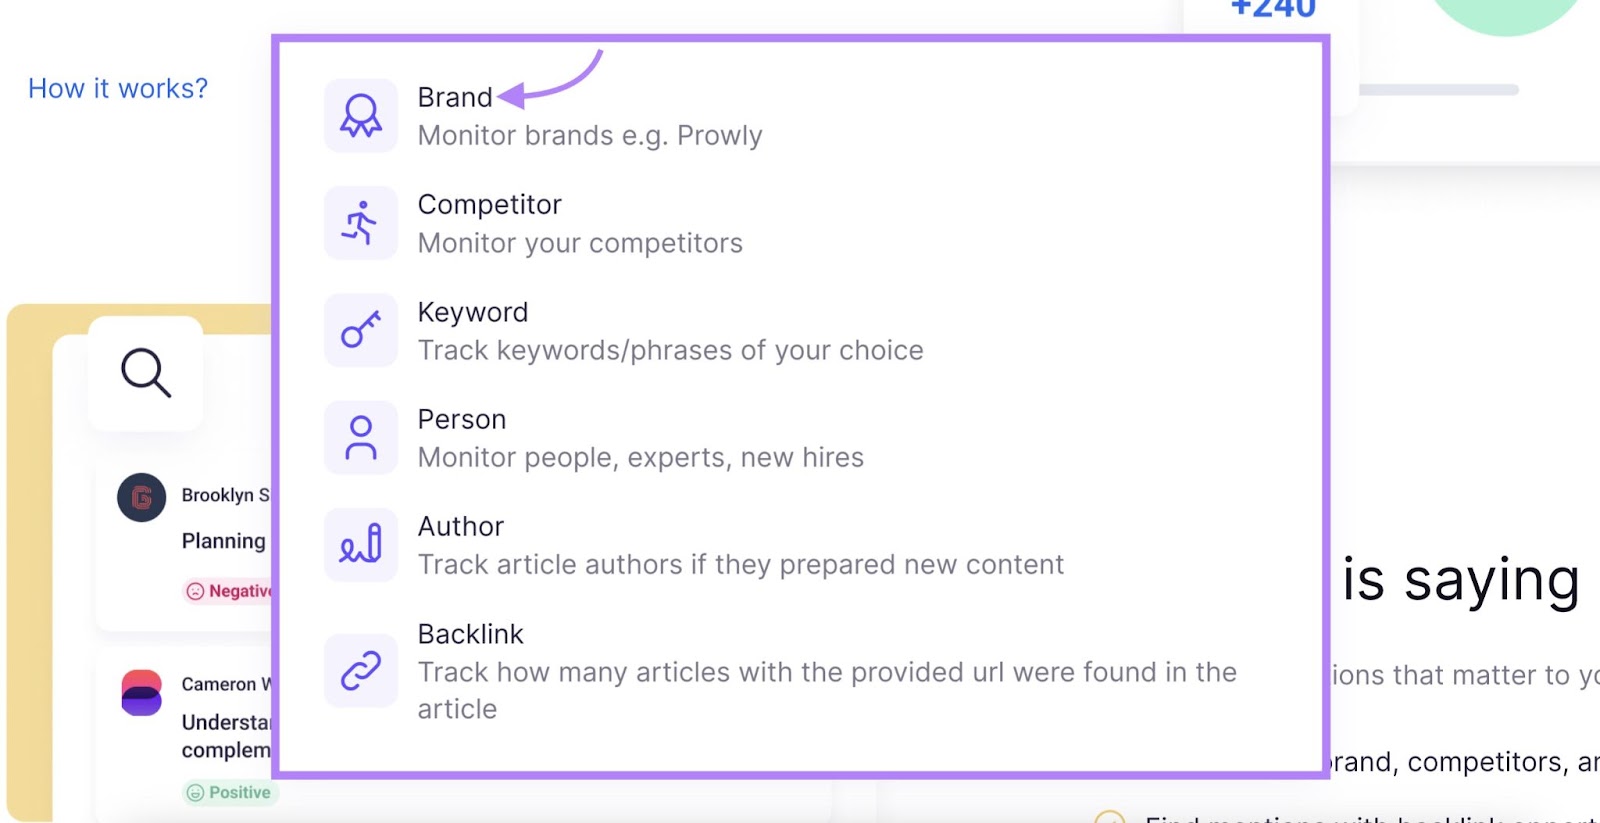 Options for 'Brand Monitoring ' tool including brand, competitor, keyword, person, author, and backlink etc. with 'Brand' selected.